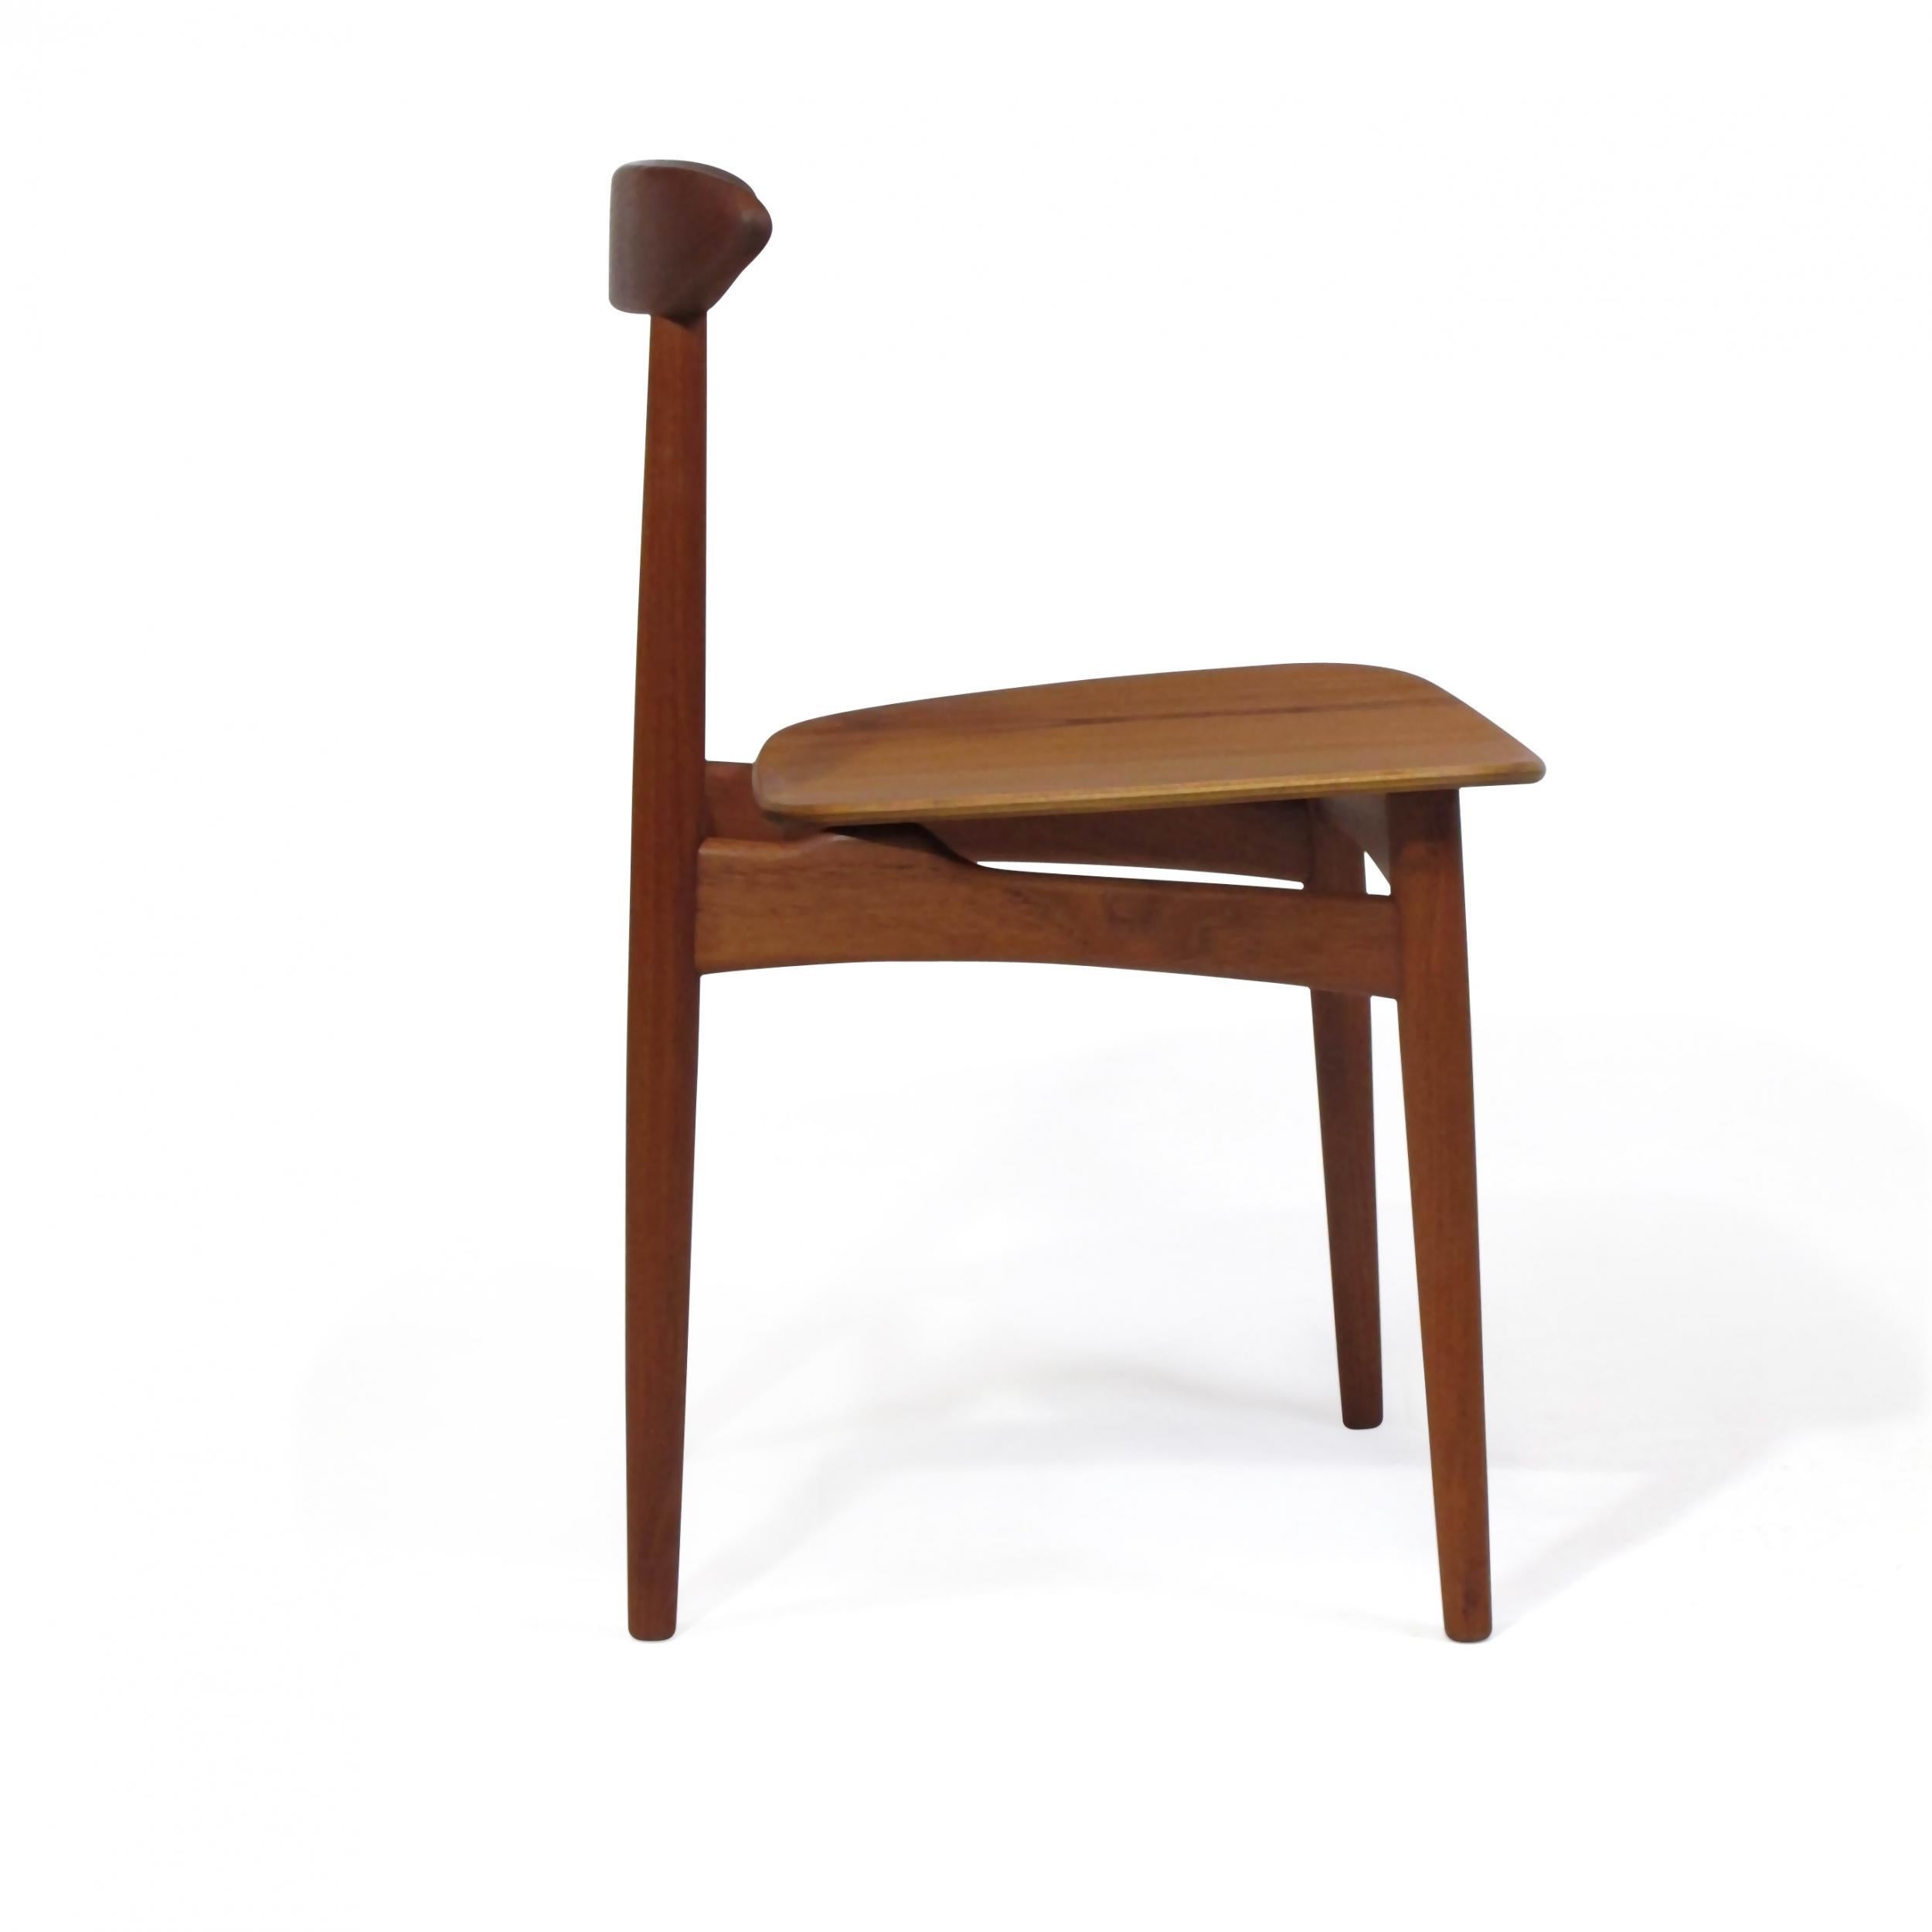 20th Century Danish Teak Dining Chairs with Wooden Seats For Sale